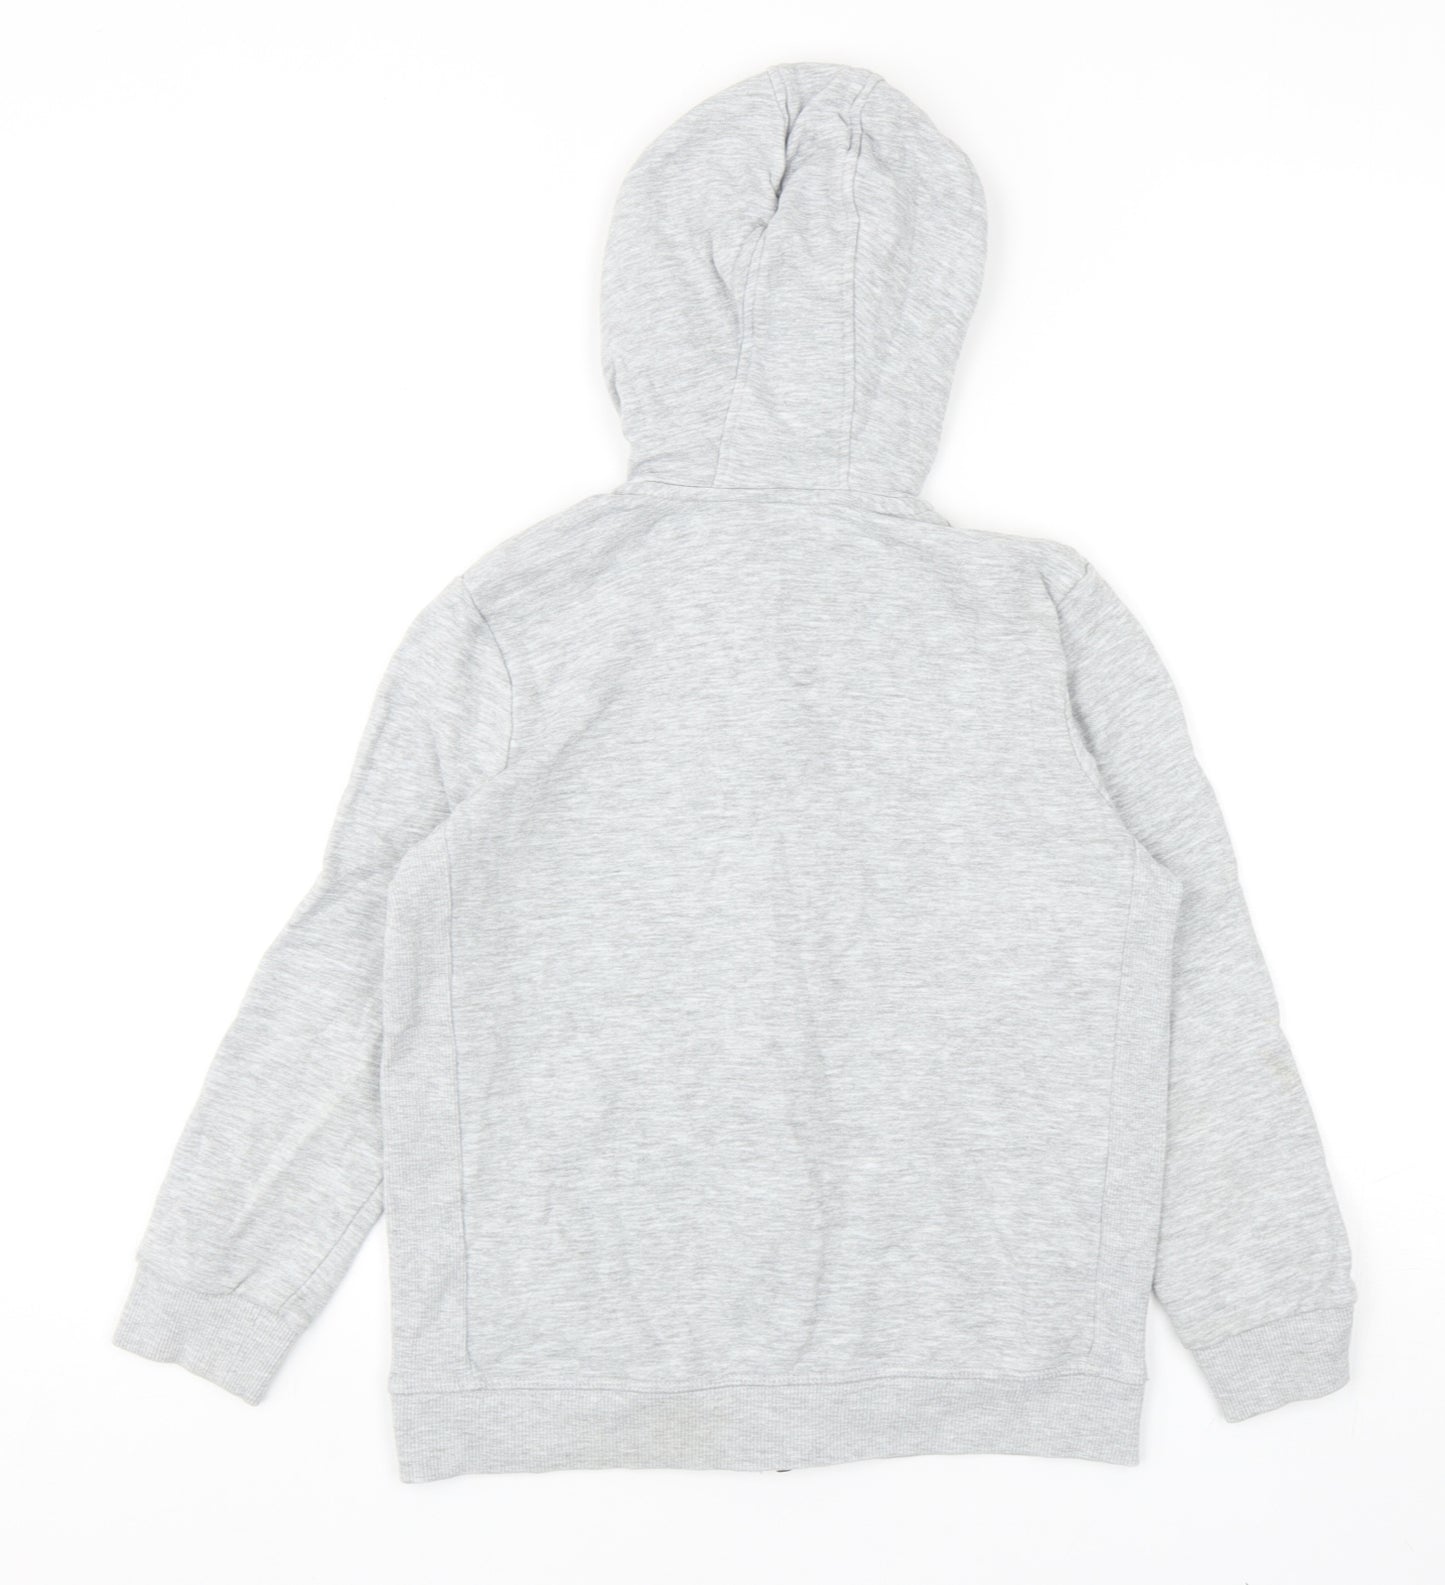 Marks and Spencer Boys Grey Cotton Full Zip Hoodie Size 8-9 Years Zip